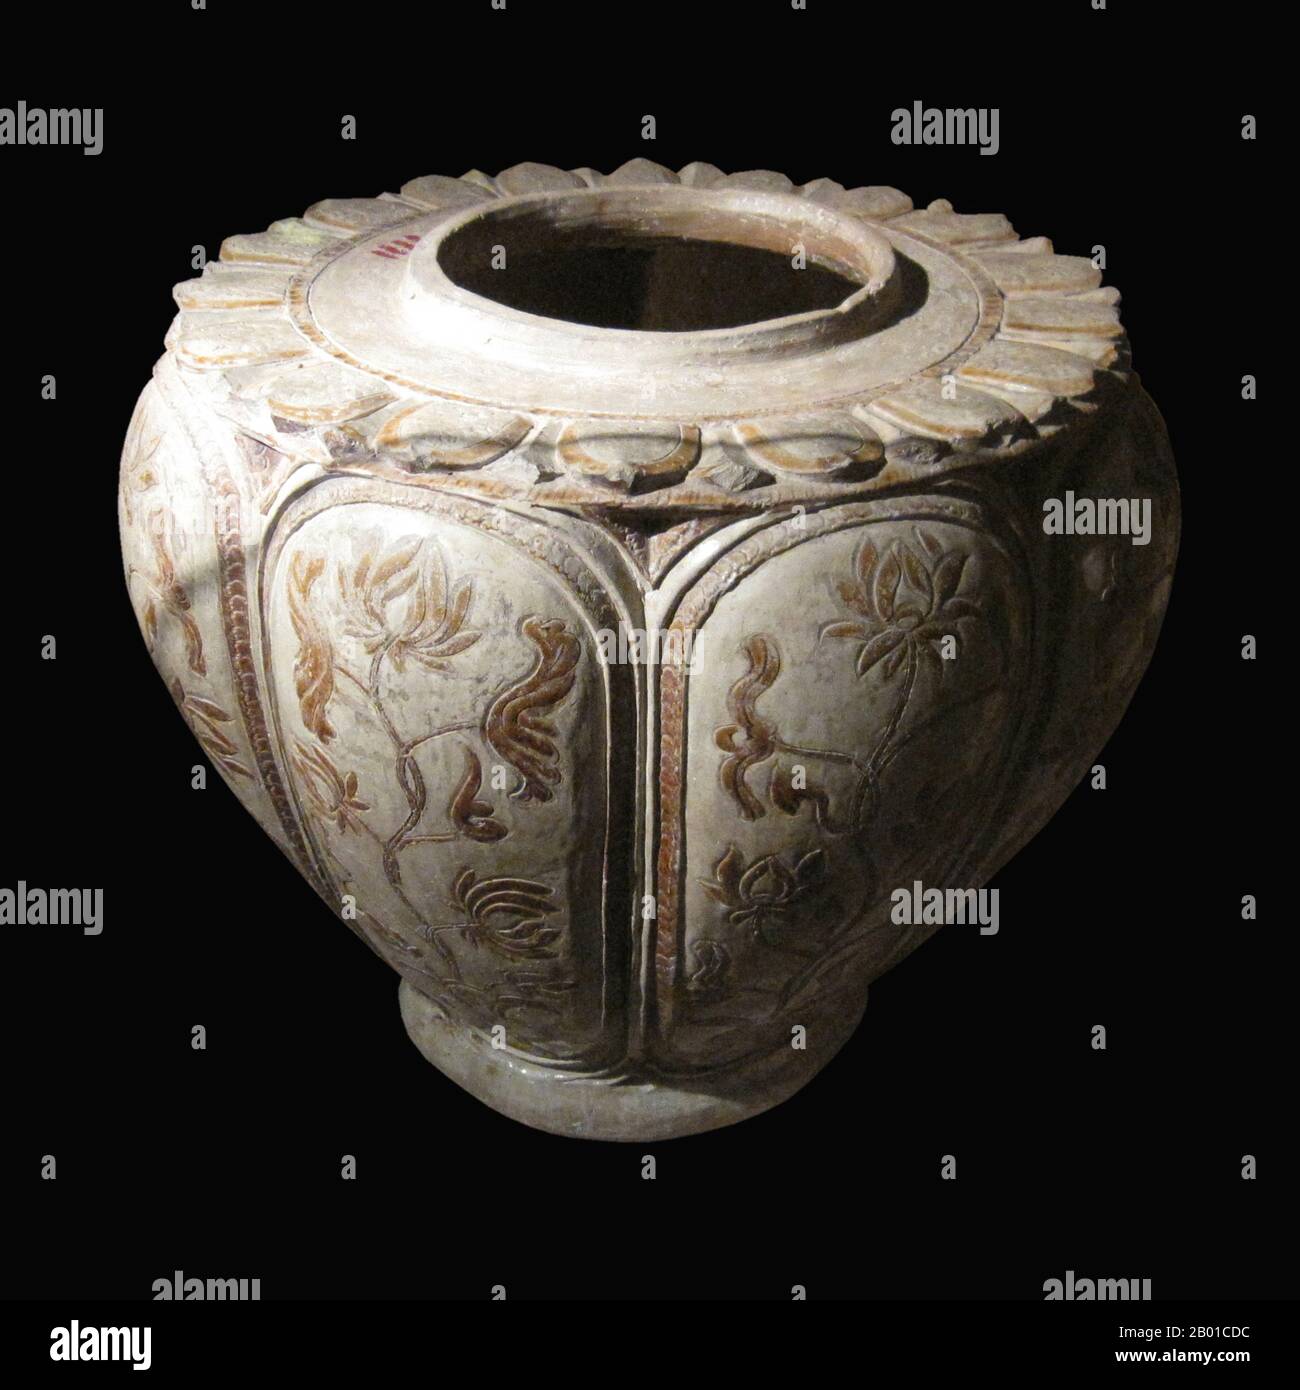 Vietnam: A jar with lotus and chrysanthemum motifs, patterned brown glaze ceramic, Trần Dynasty, Nam Định province, 13th-14th century. National Museum of Vietnamese History, Hanoi. Photo by Gryffindor - Jbarta (CC BY-SA 3.0 License). Stock Photo